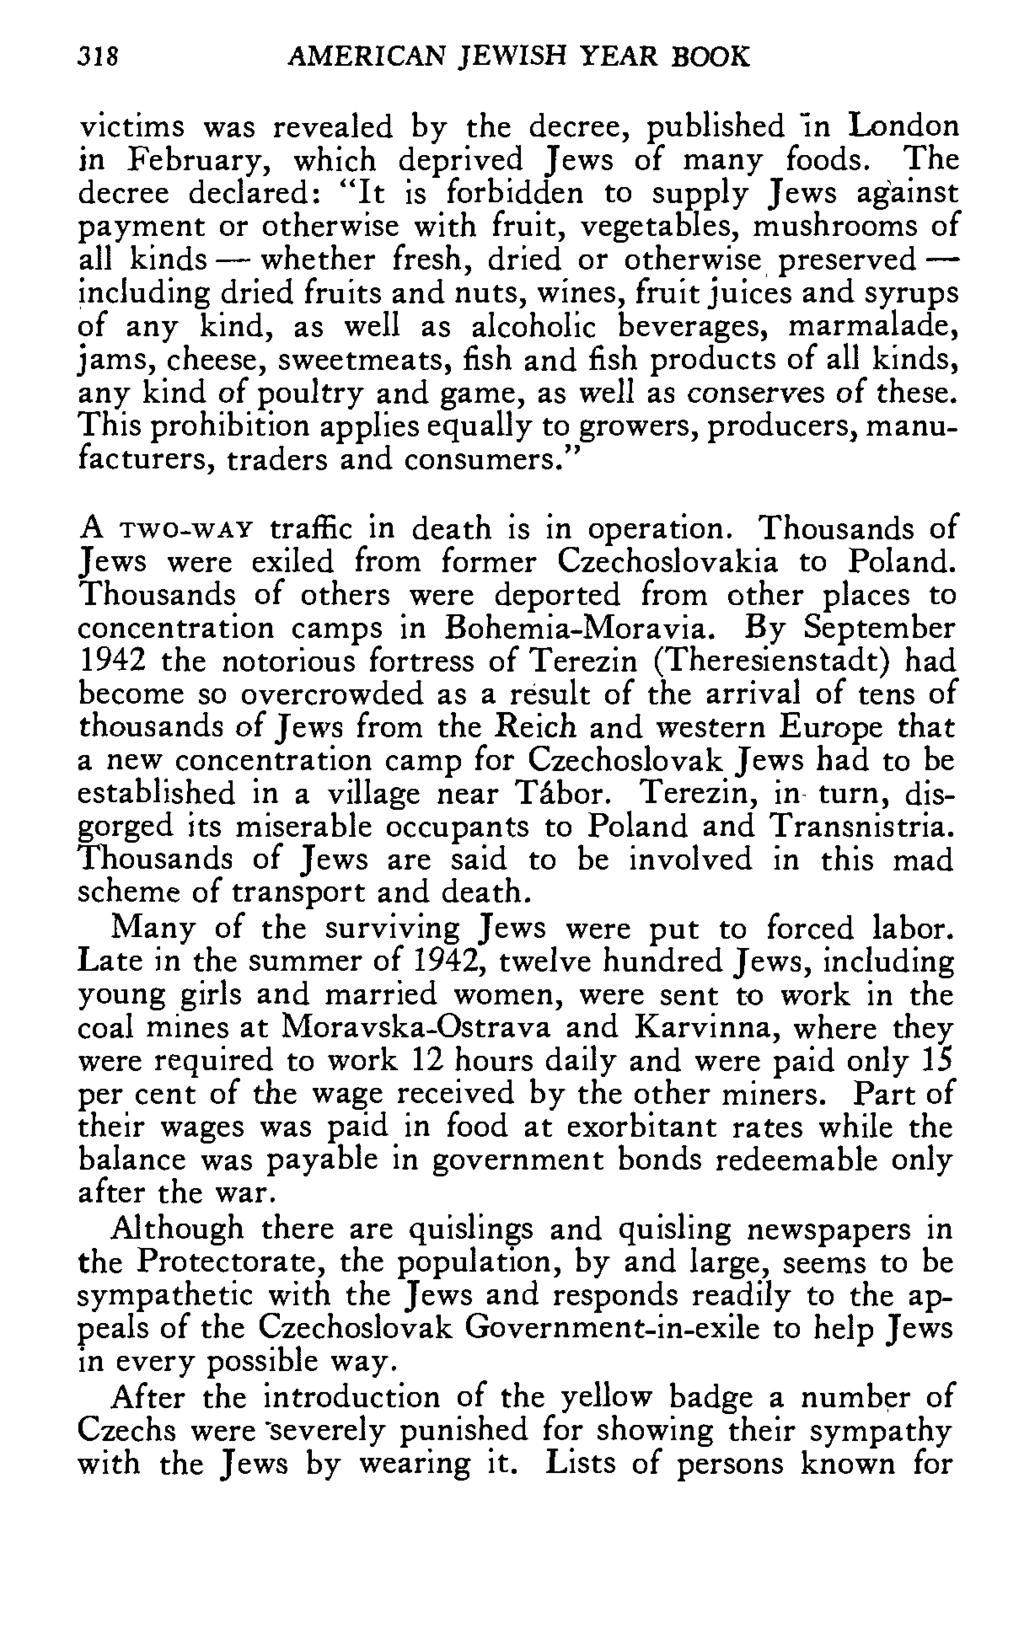 318 AMERICAN JEWISH YEAR BOOK victims was revealed by the decree, published "in London in February, which deprived Jews of many foods.